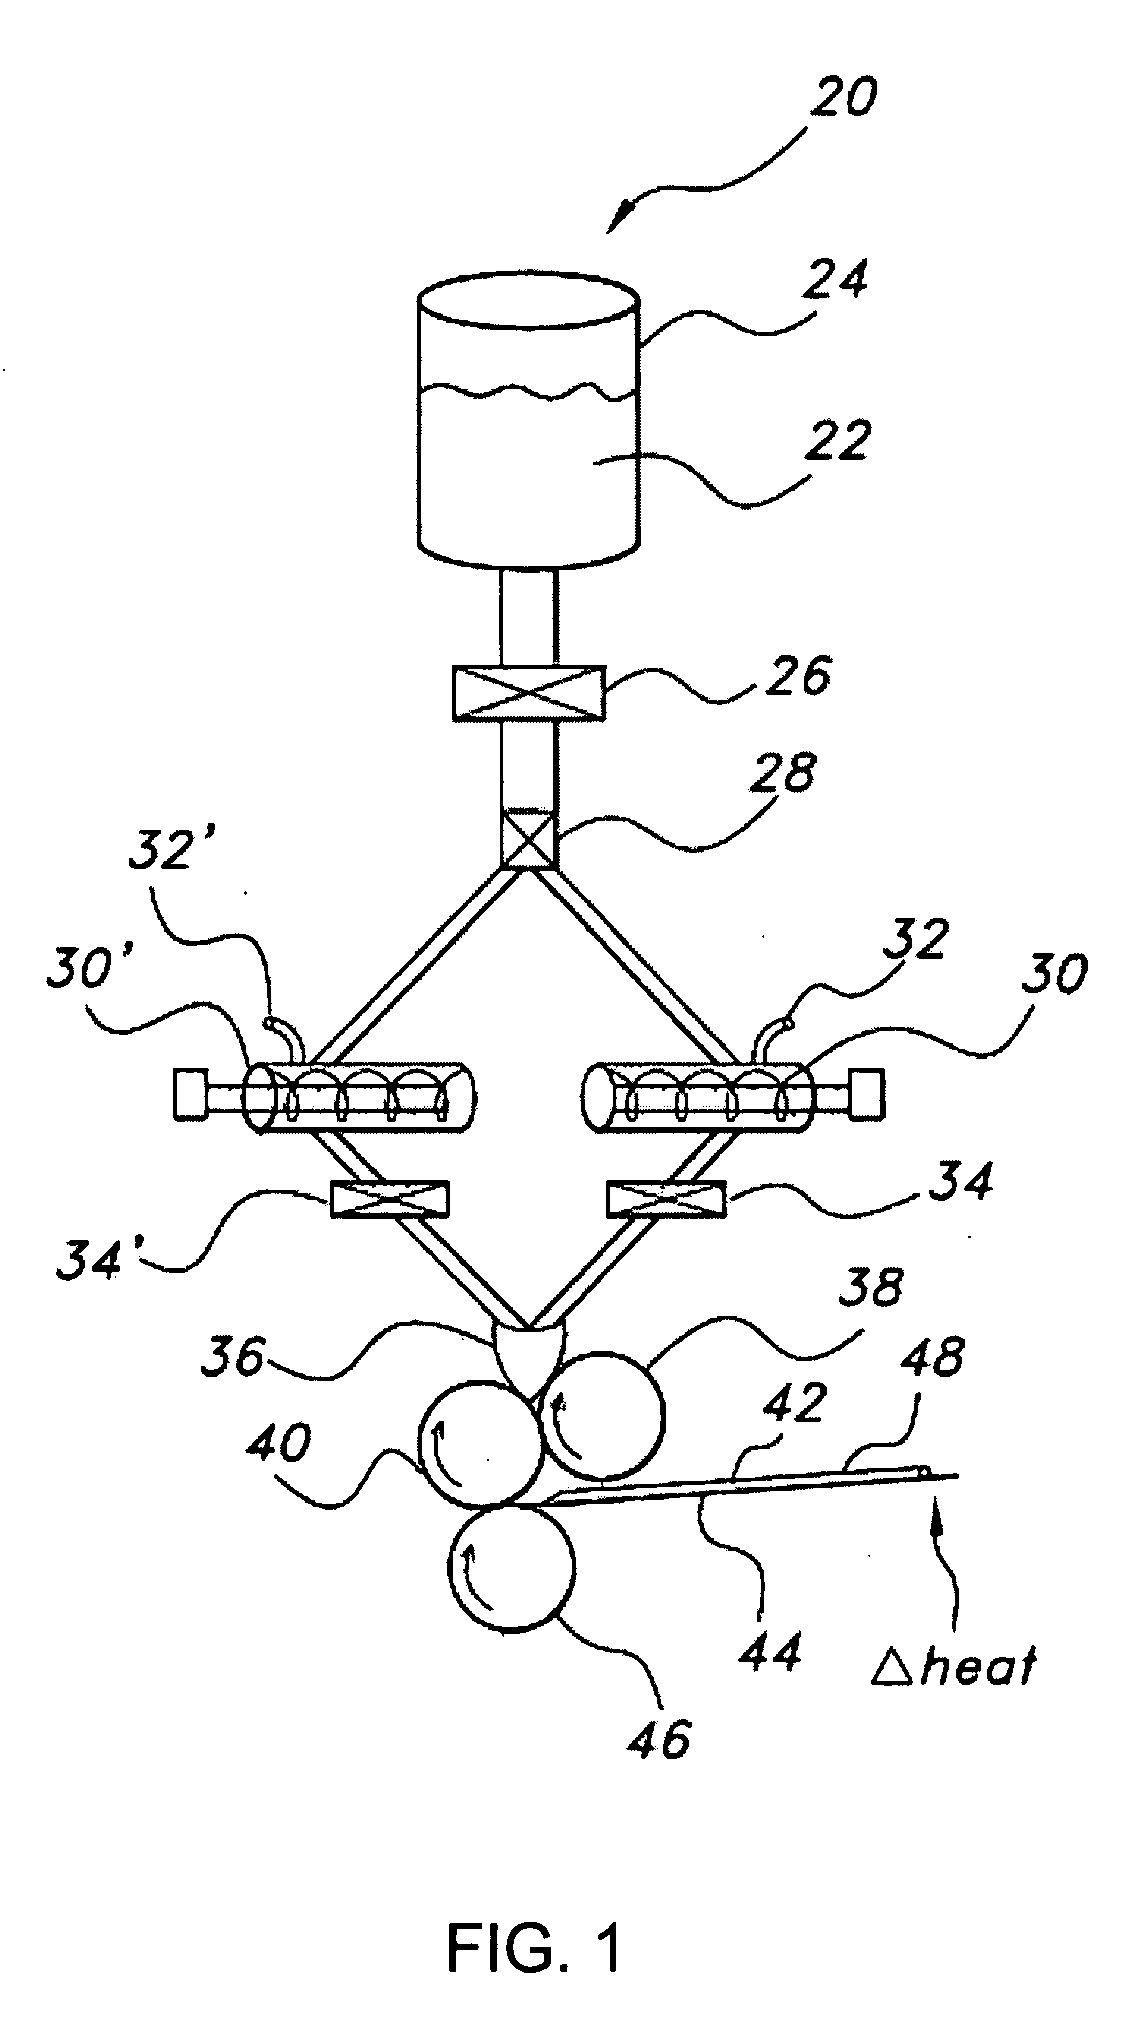 Film shreds and delivery system incorporating same